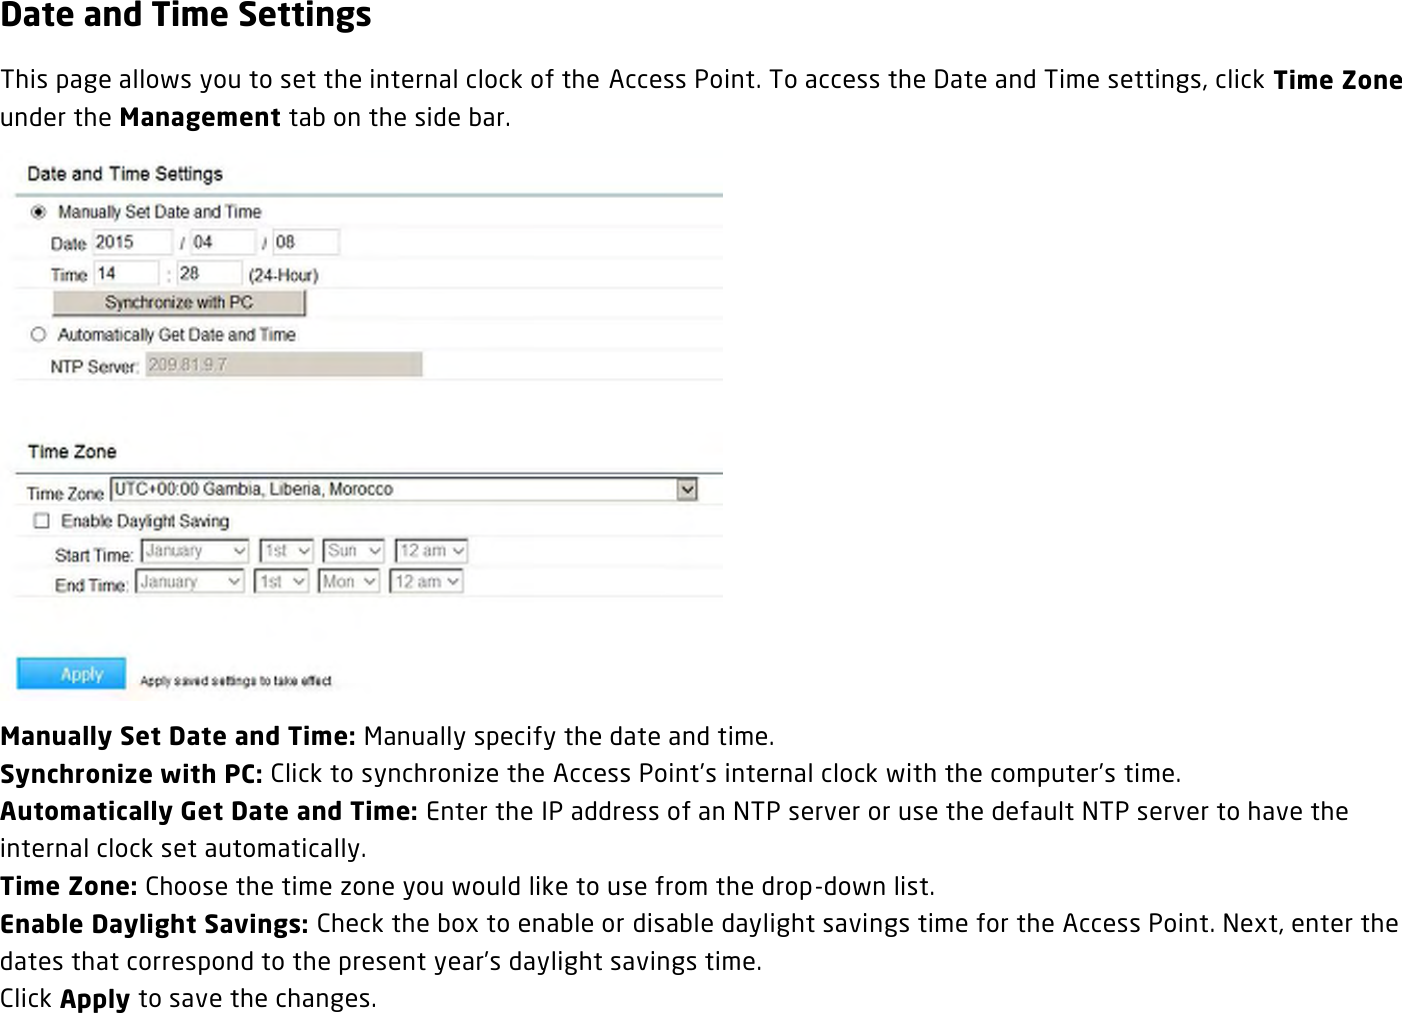 Date and Time Settings This page allows you to set the internal clock of the Access Point. To access the Date and Time settings, click Time Zone under the Management tab on the side bar.  Manually Set Date and Time: Manually specify the date and time. Synchronize with PC: Click to synchronize the Access Point’s internal clock with the computer’s time. Automatically Get Date and Time: Enter the IP address of an NTP server or use the default NTP server to have the internal clock set automatically. Time Zone: Choose the time zone you would like to use from the drop-down list. Enable Daylight Savings: Check the box to enable or disable daylight savings time for the Access Point. Next, enter the dates that correspond to the present year’s daylight savings time.   Click Apply to save the changes. 